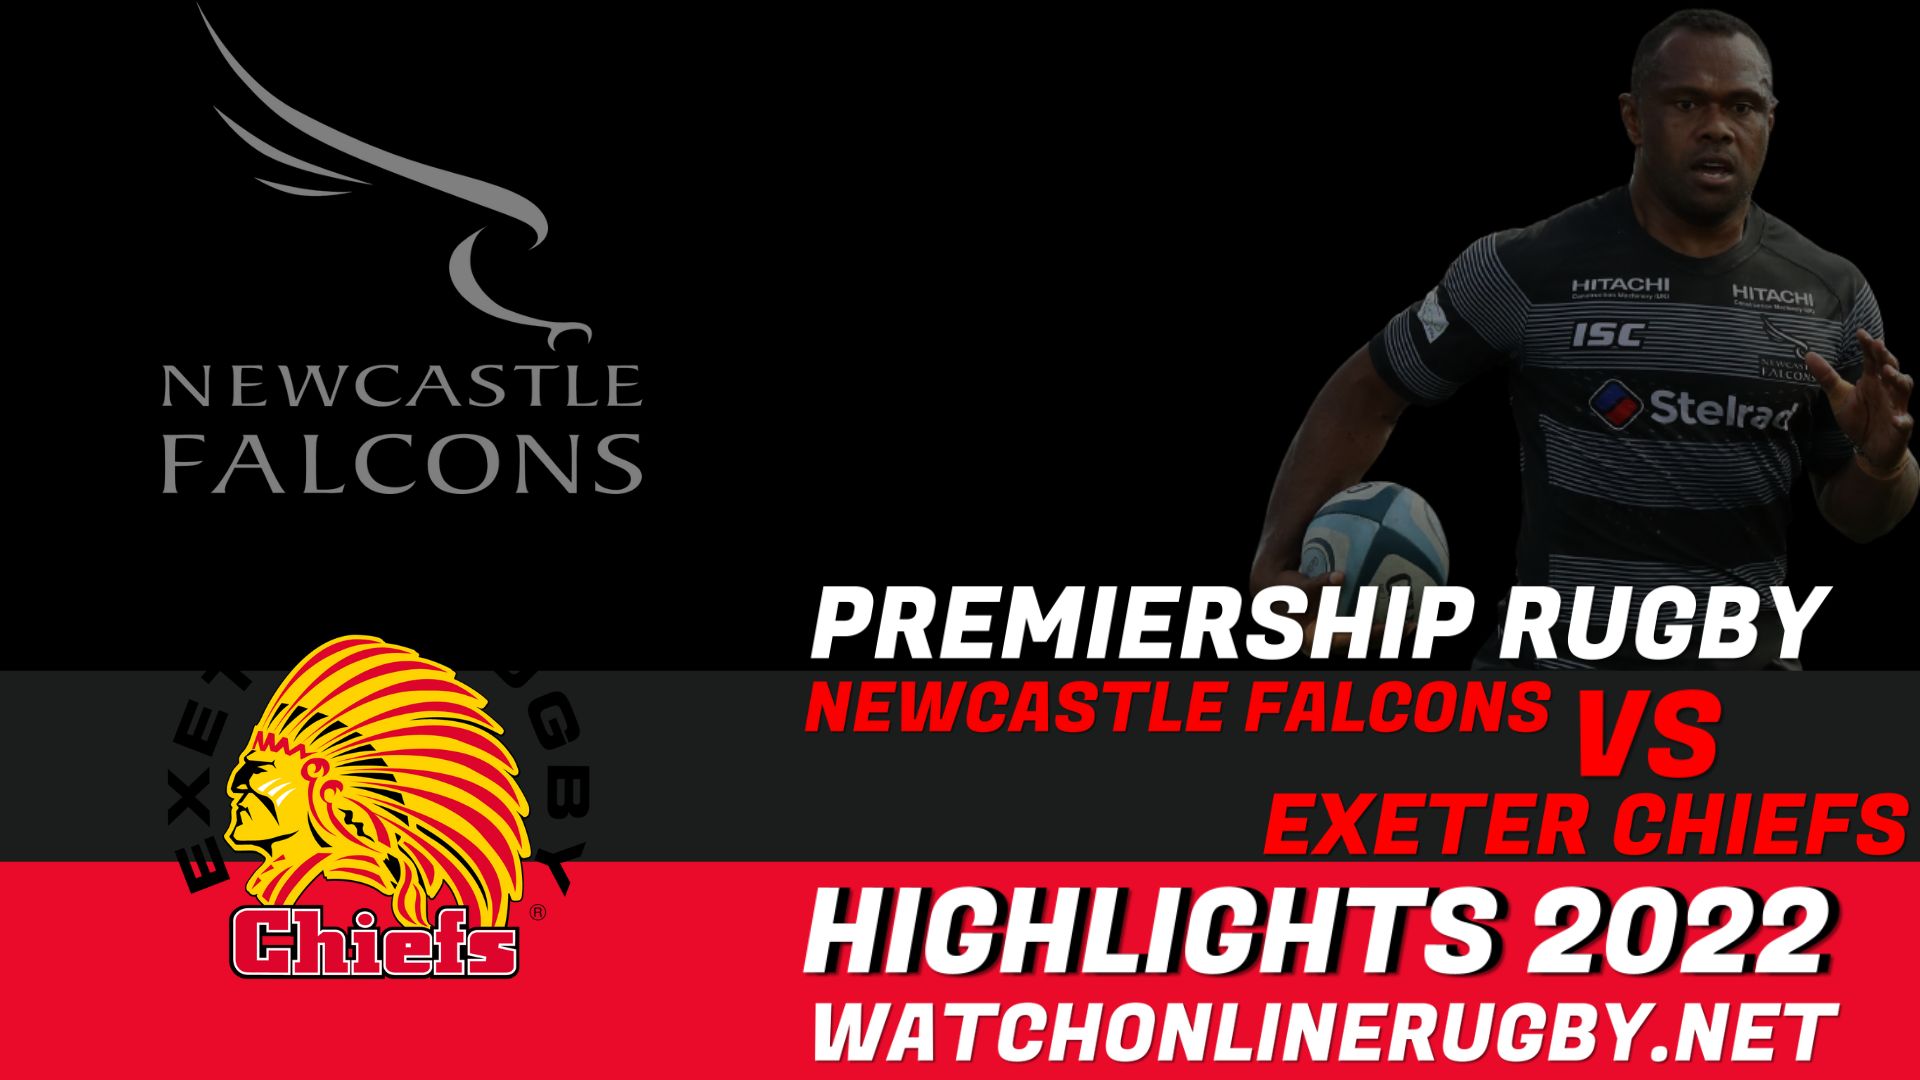 Newcastle Falcons Vs Exeter Chiefs Premiership Rugby 2022 RD 17